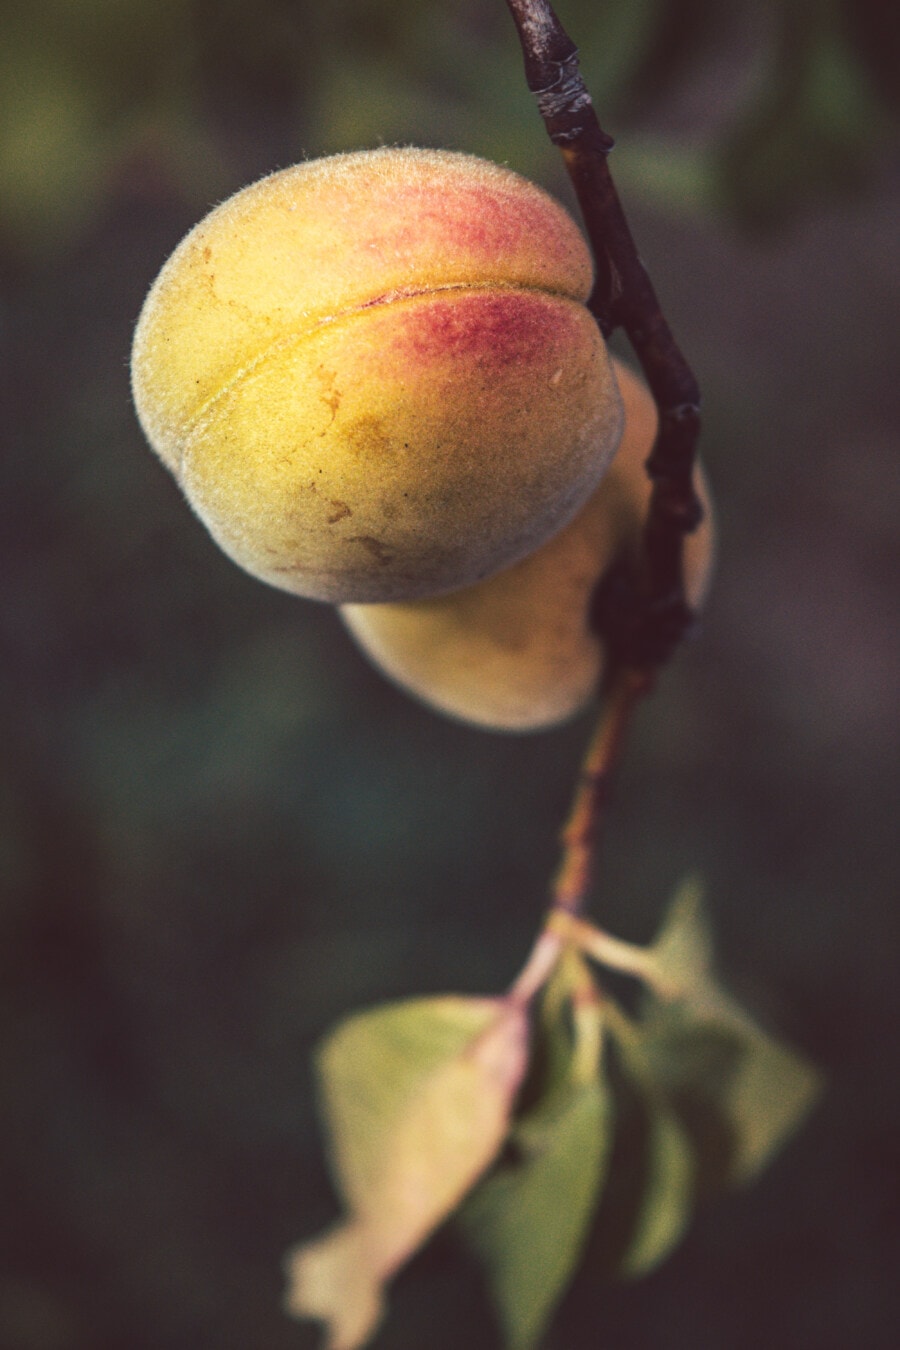 fruit, peach, fruit tree, orchard, close-up, sweet, organic, agriculture, farming, food